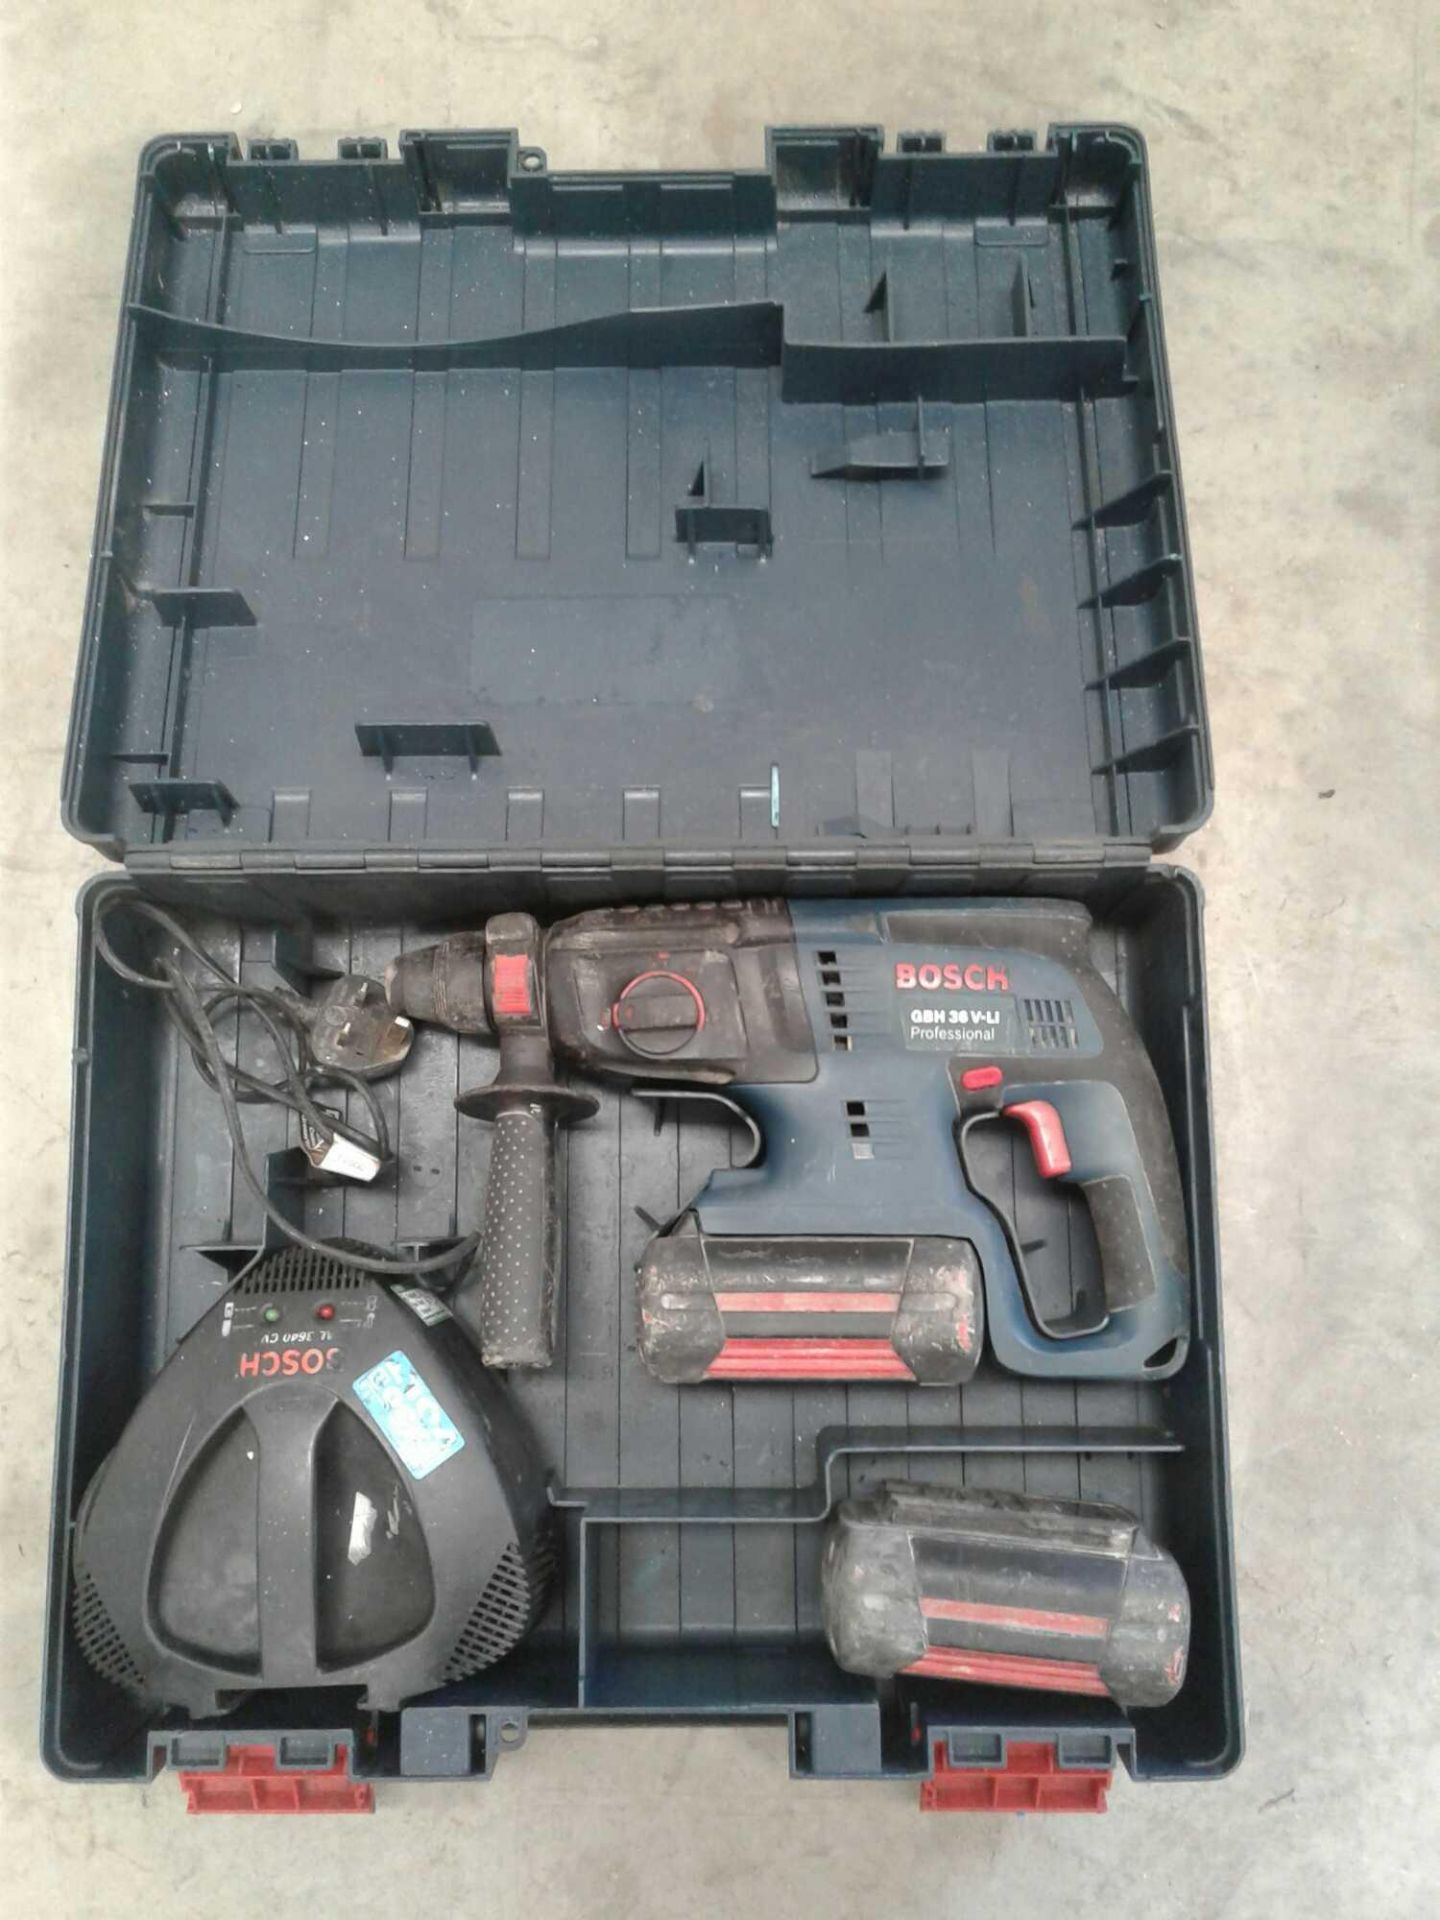 Bosch GBH 36 Volt professional cordless hammer drill - Image 4 of 5